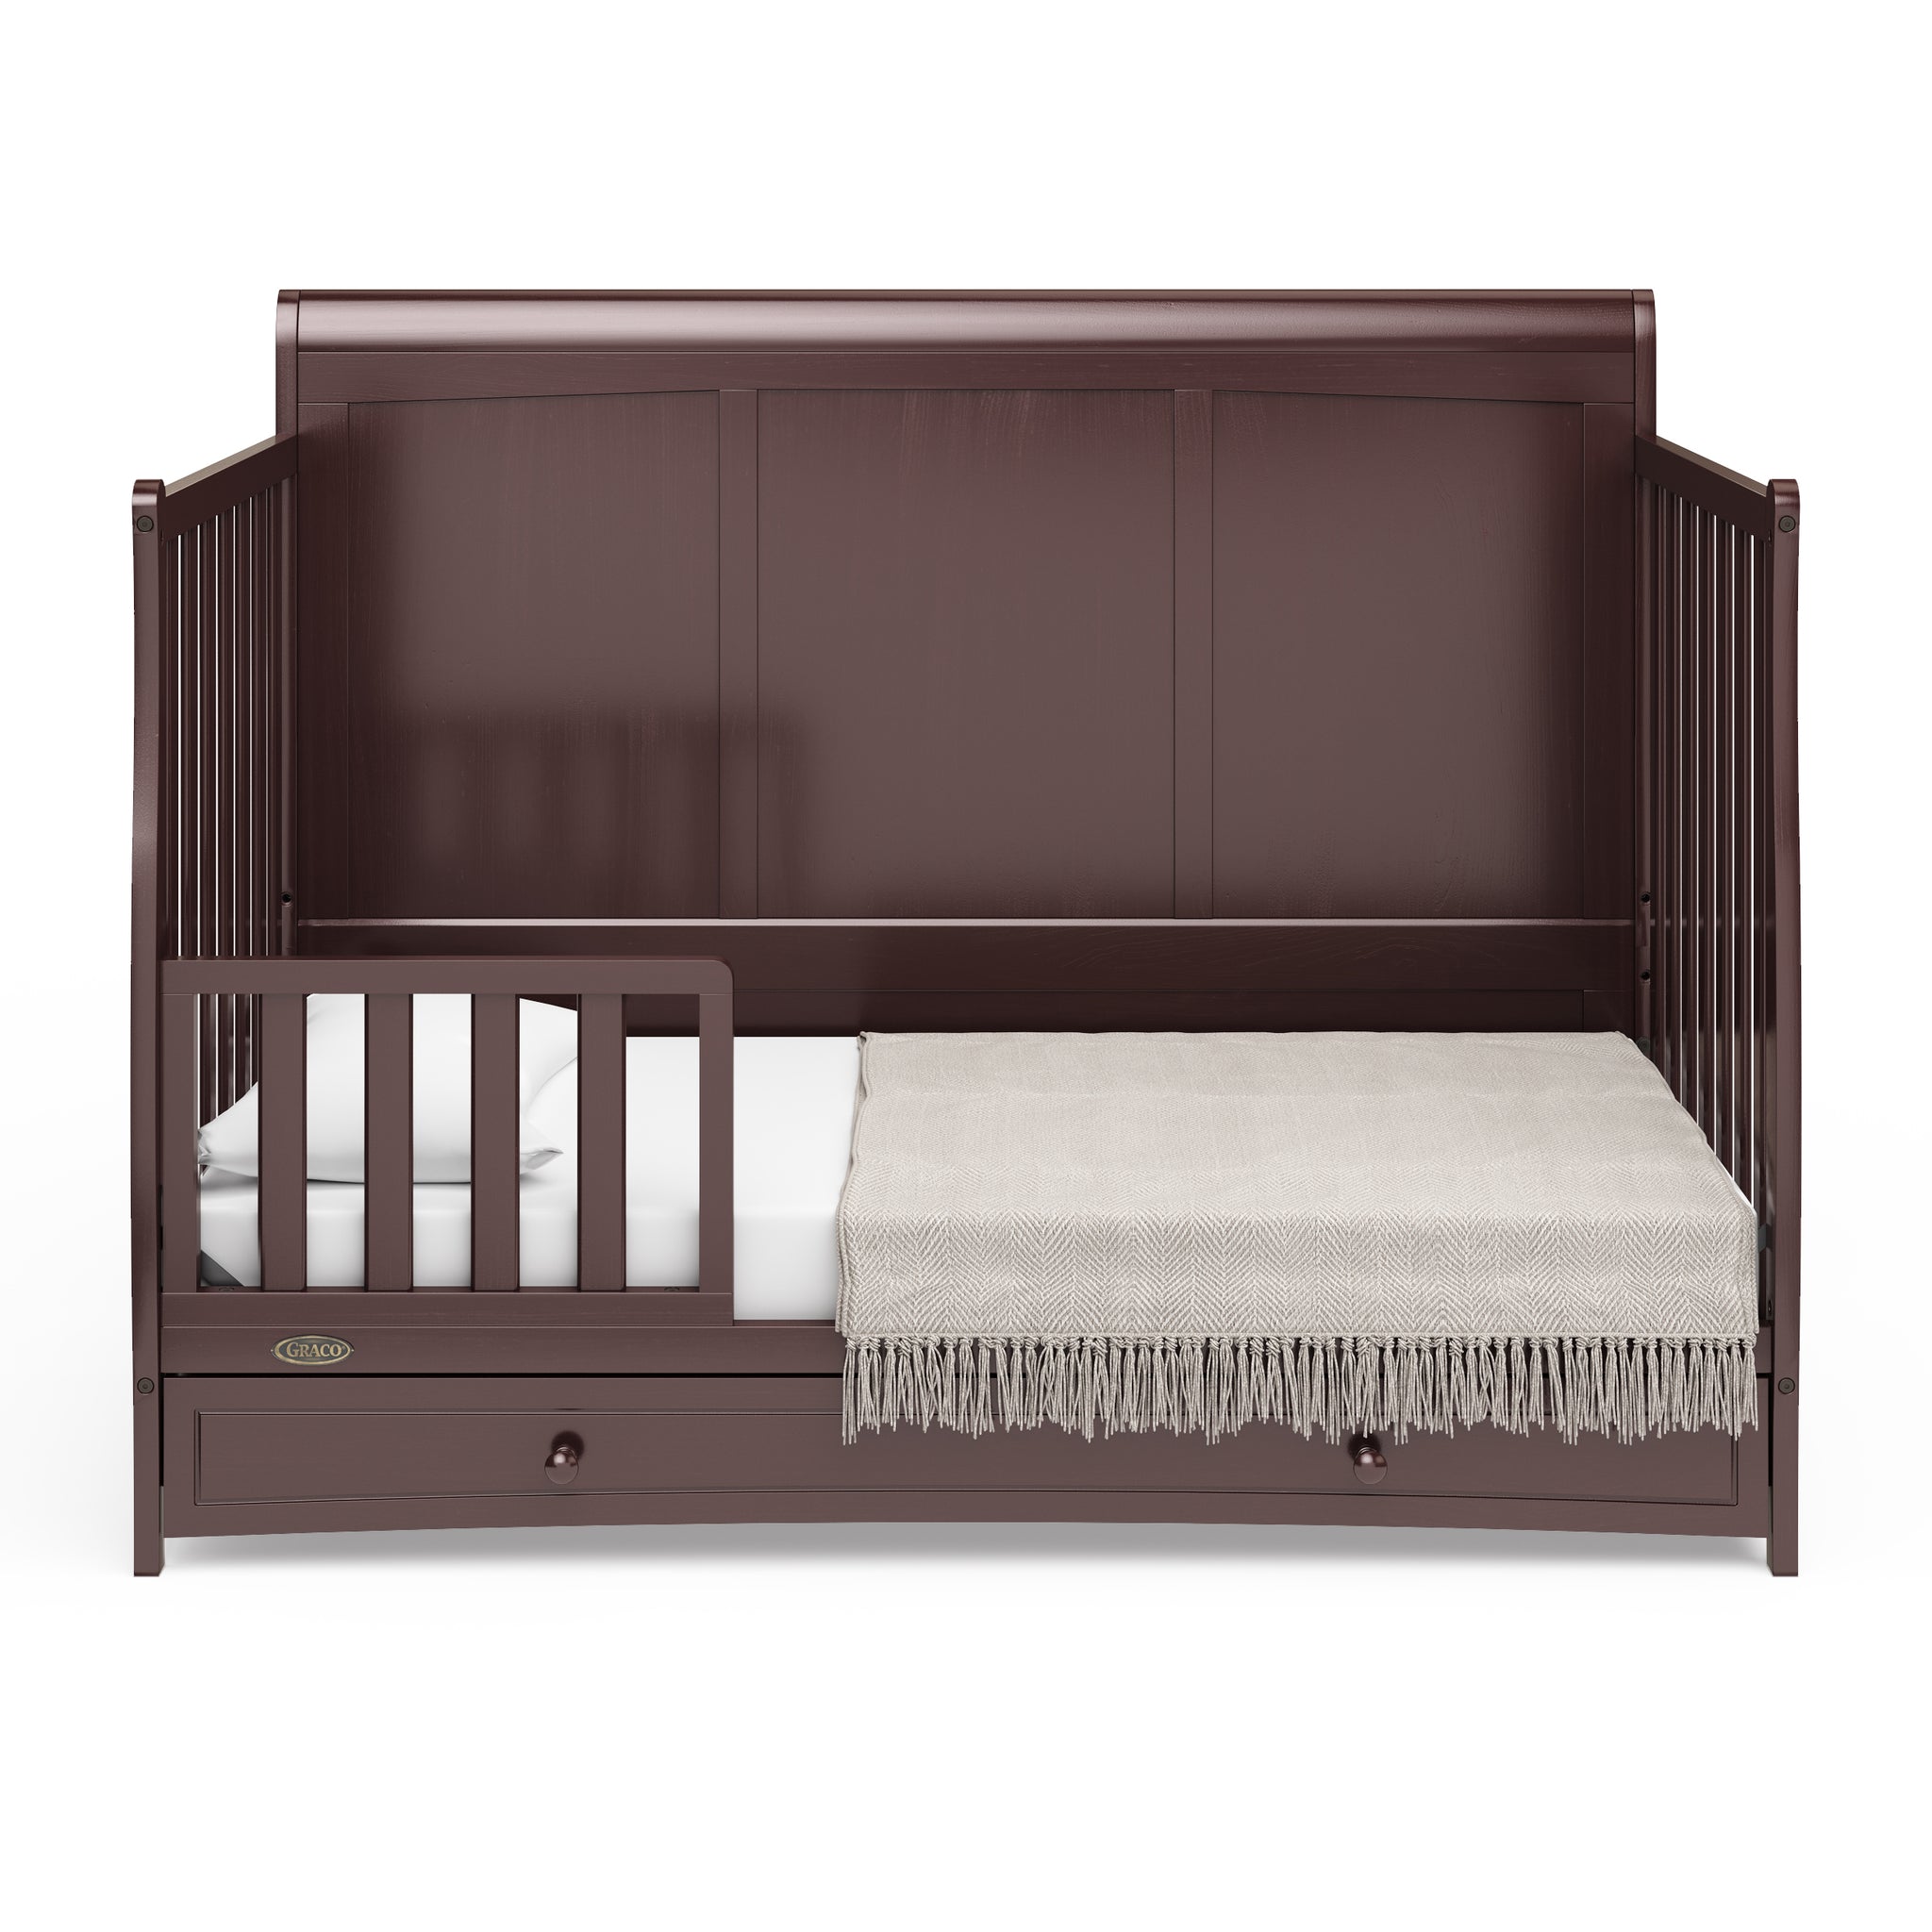 Espresso crib with drawer in toddler bed conversion with one safety guardrail